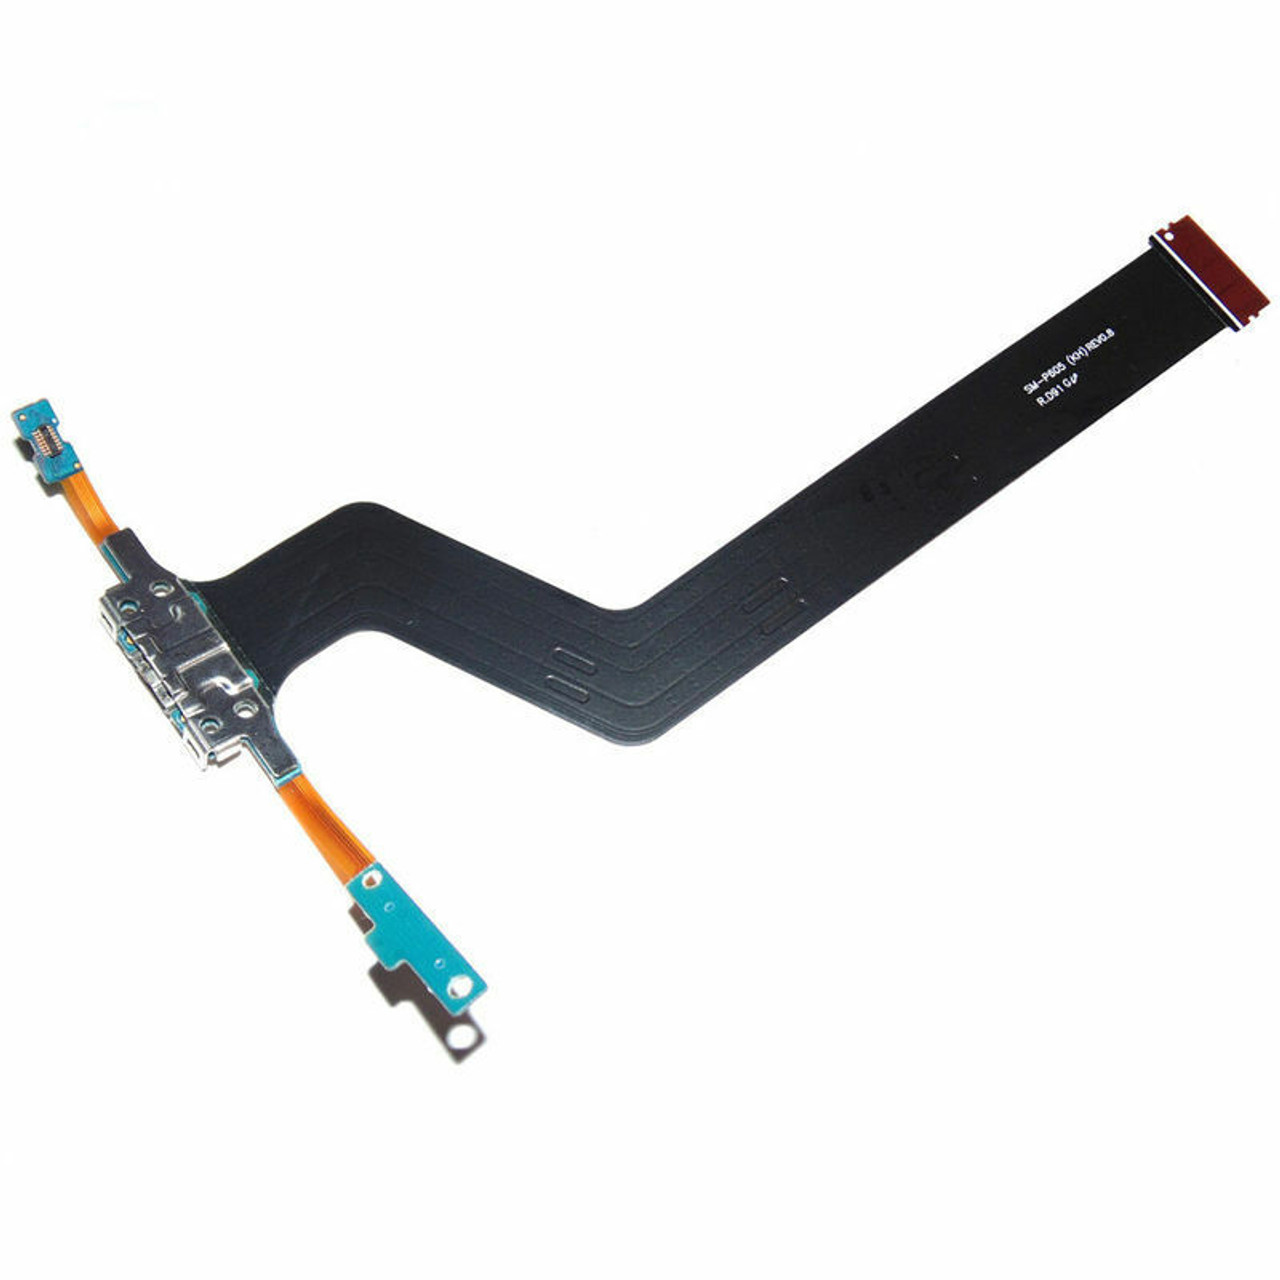 OEM Charging USB Port Mic 2014 Flex Cable For Samsung Galaxy Note 10.1 P600 P605